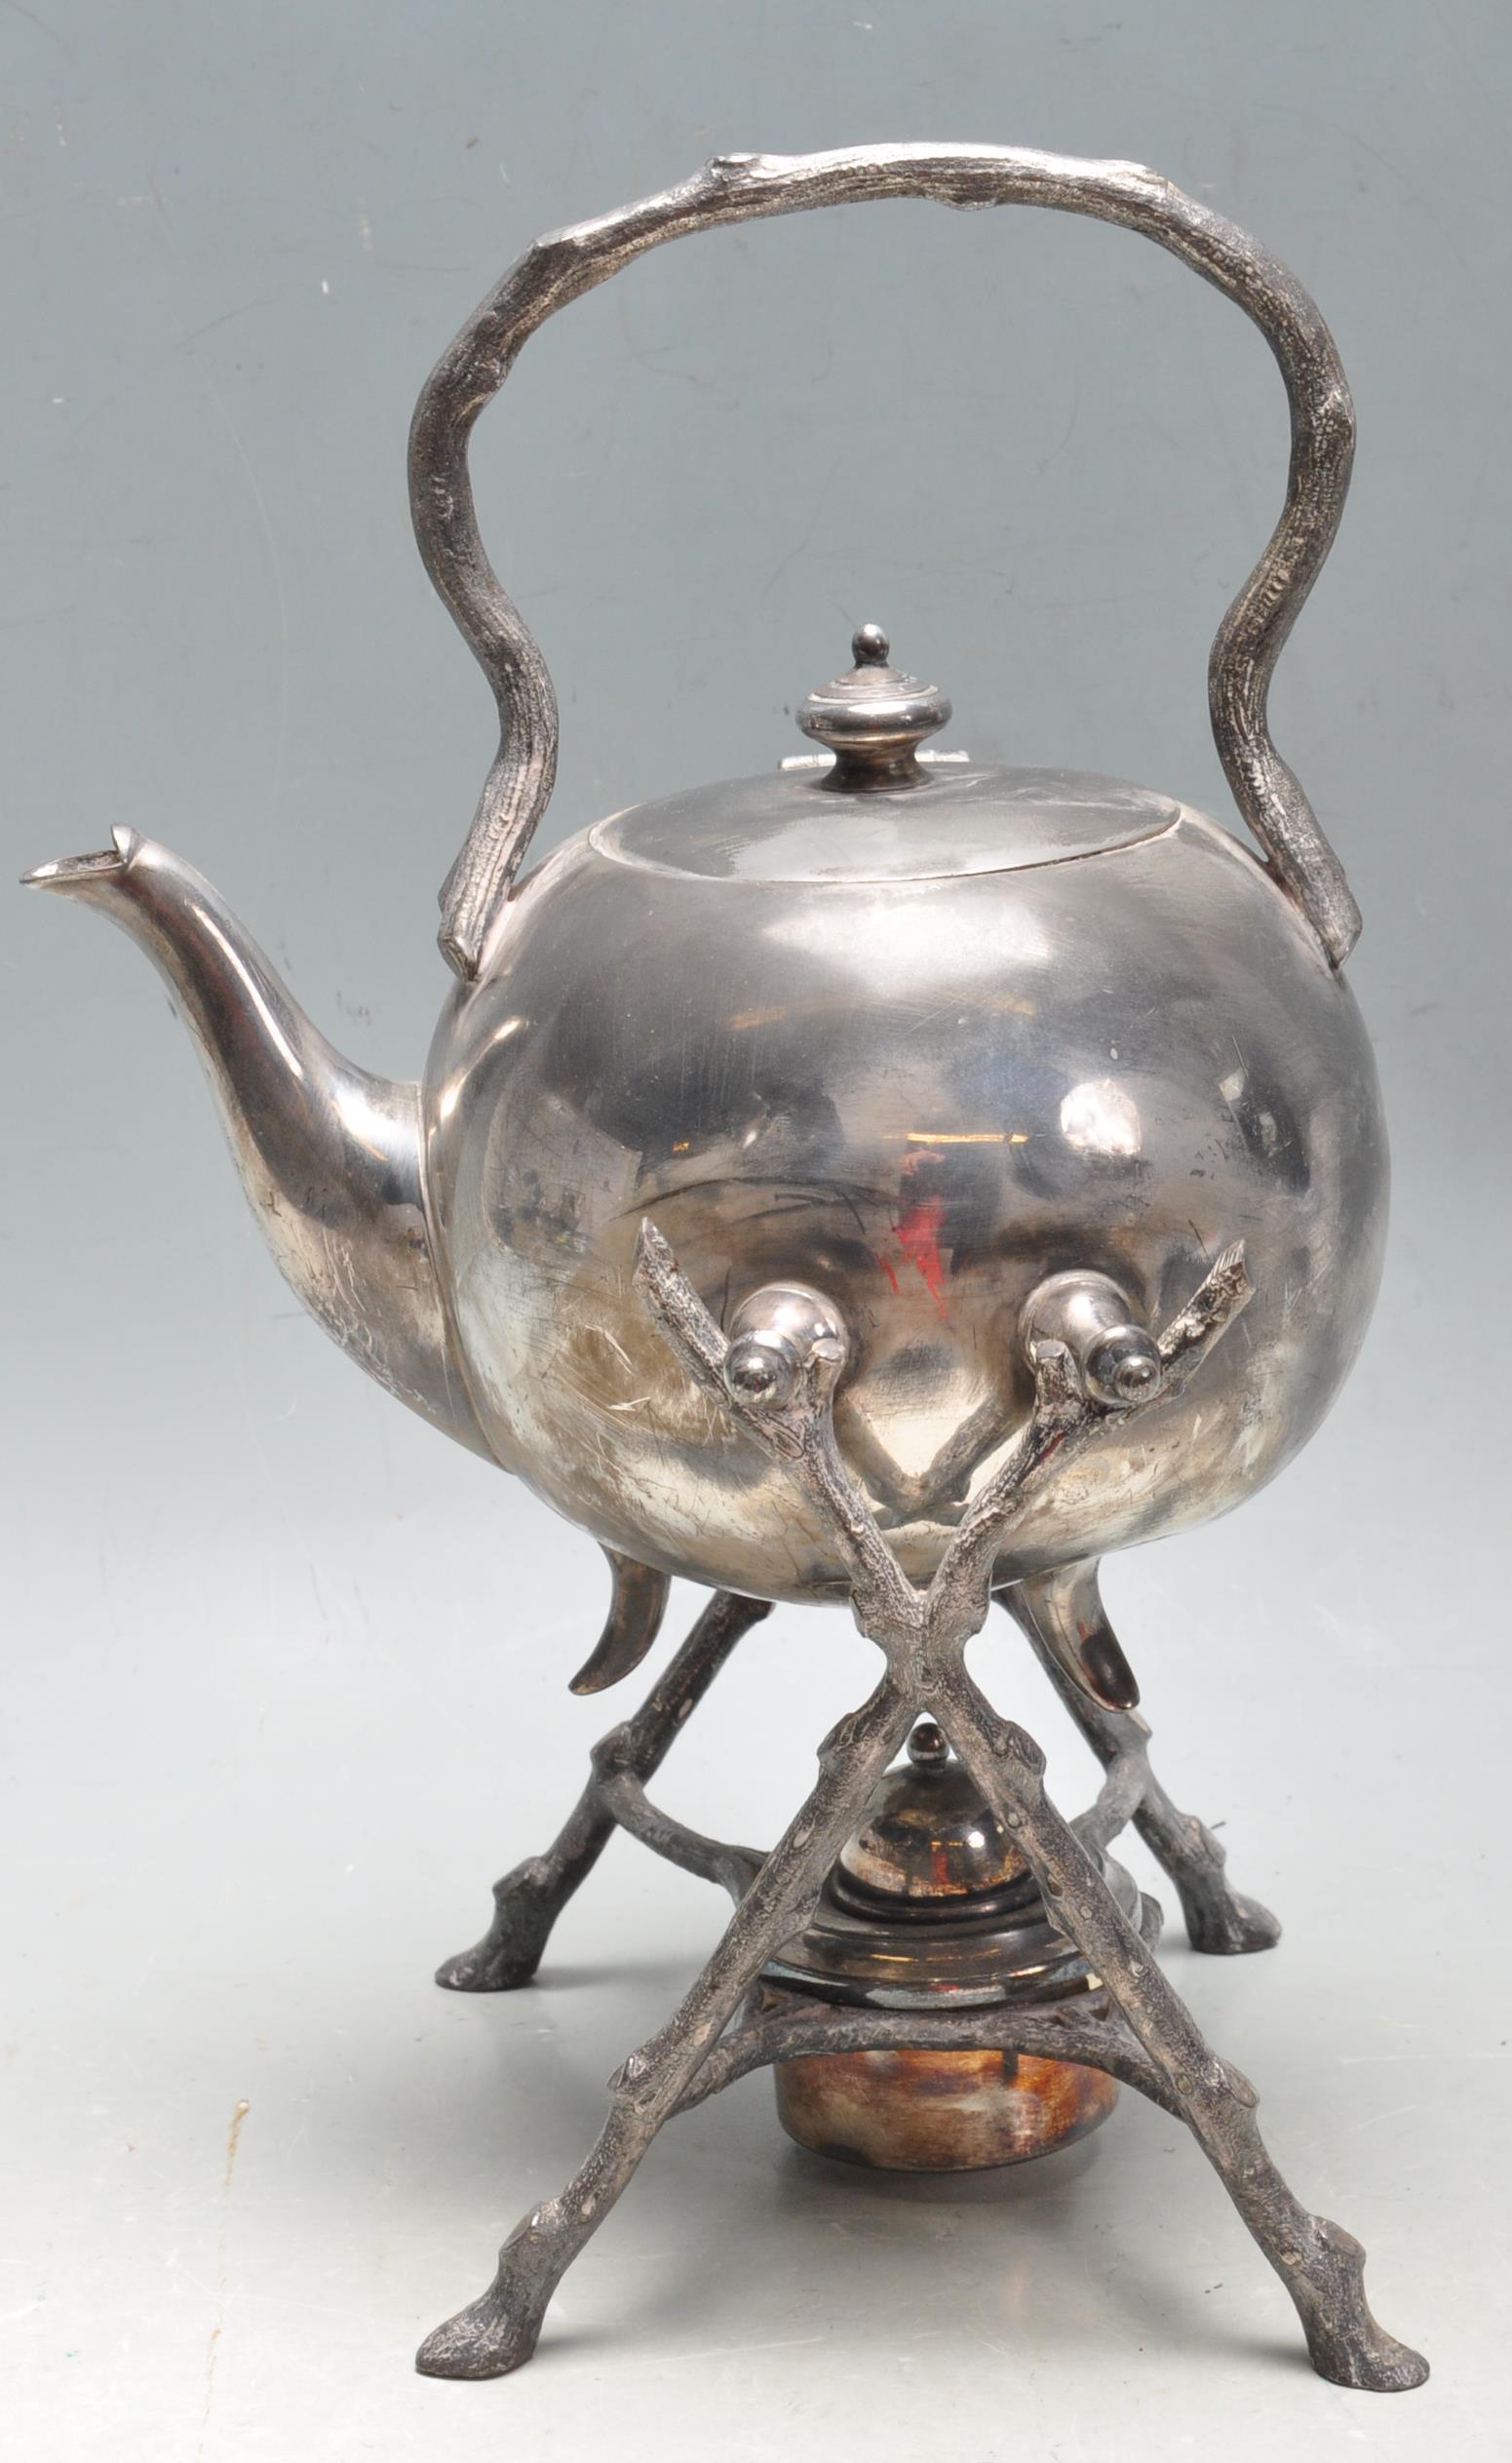 EARLY 20TH CENTURY SILVER PLATED SPIRIT KETTLE BY JOHN TURTON AND CO